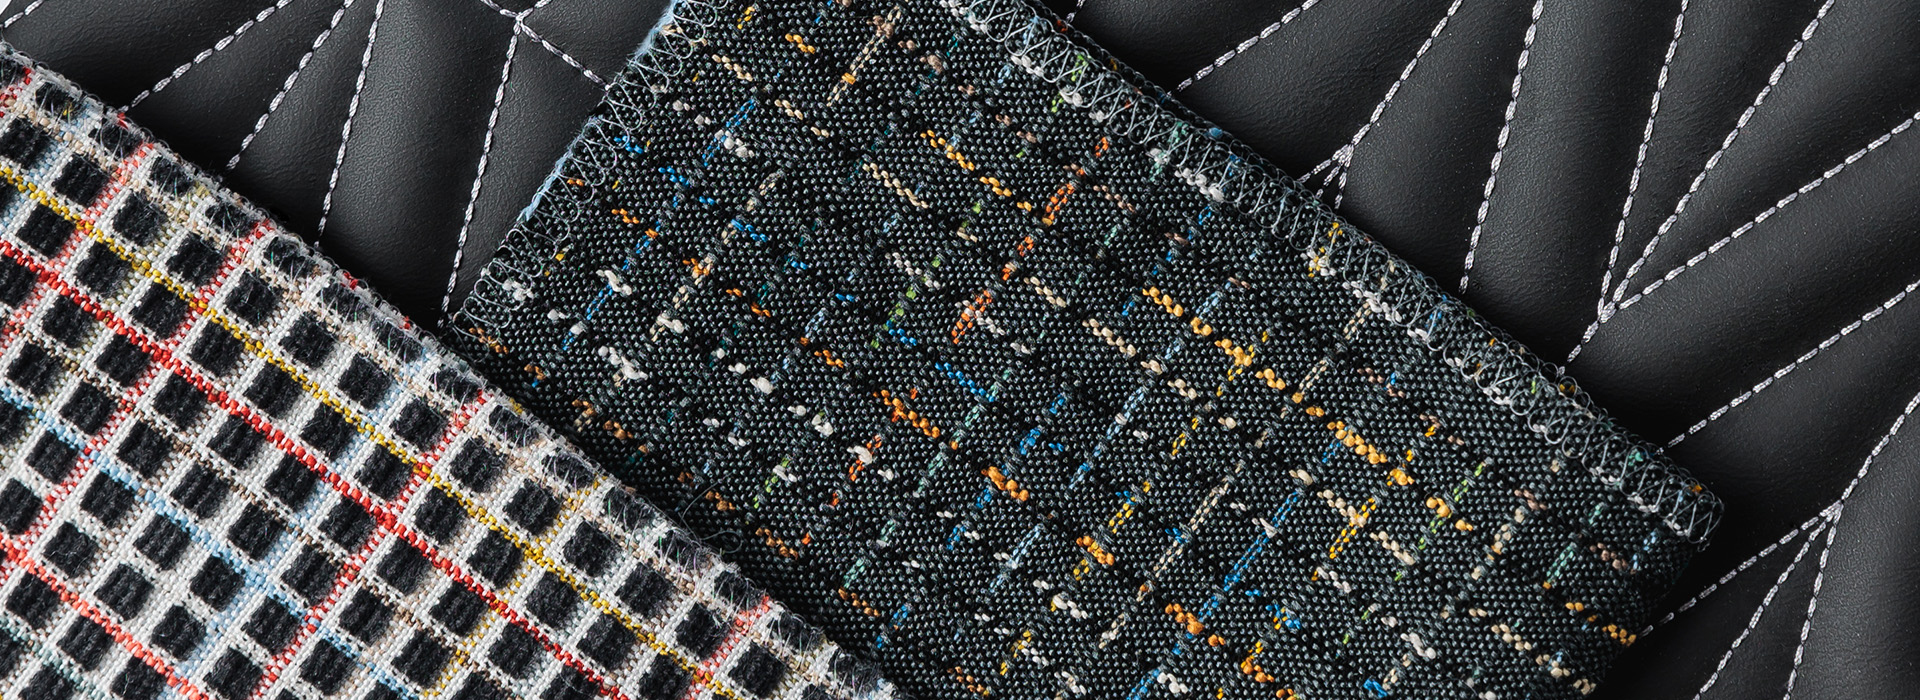 Favorite Things Collection From Brentano